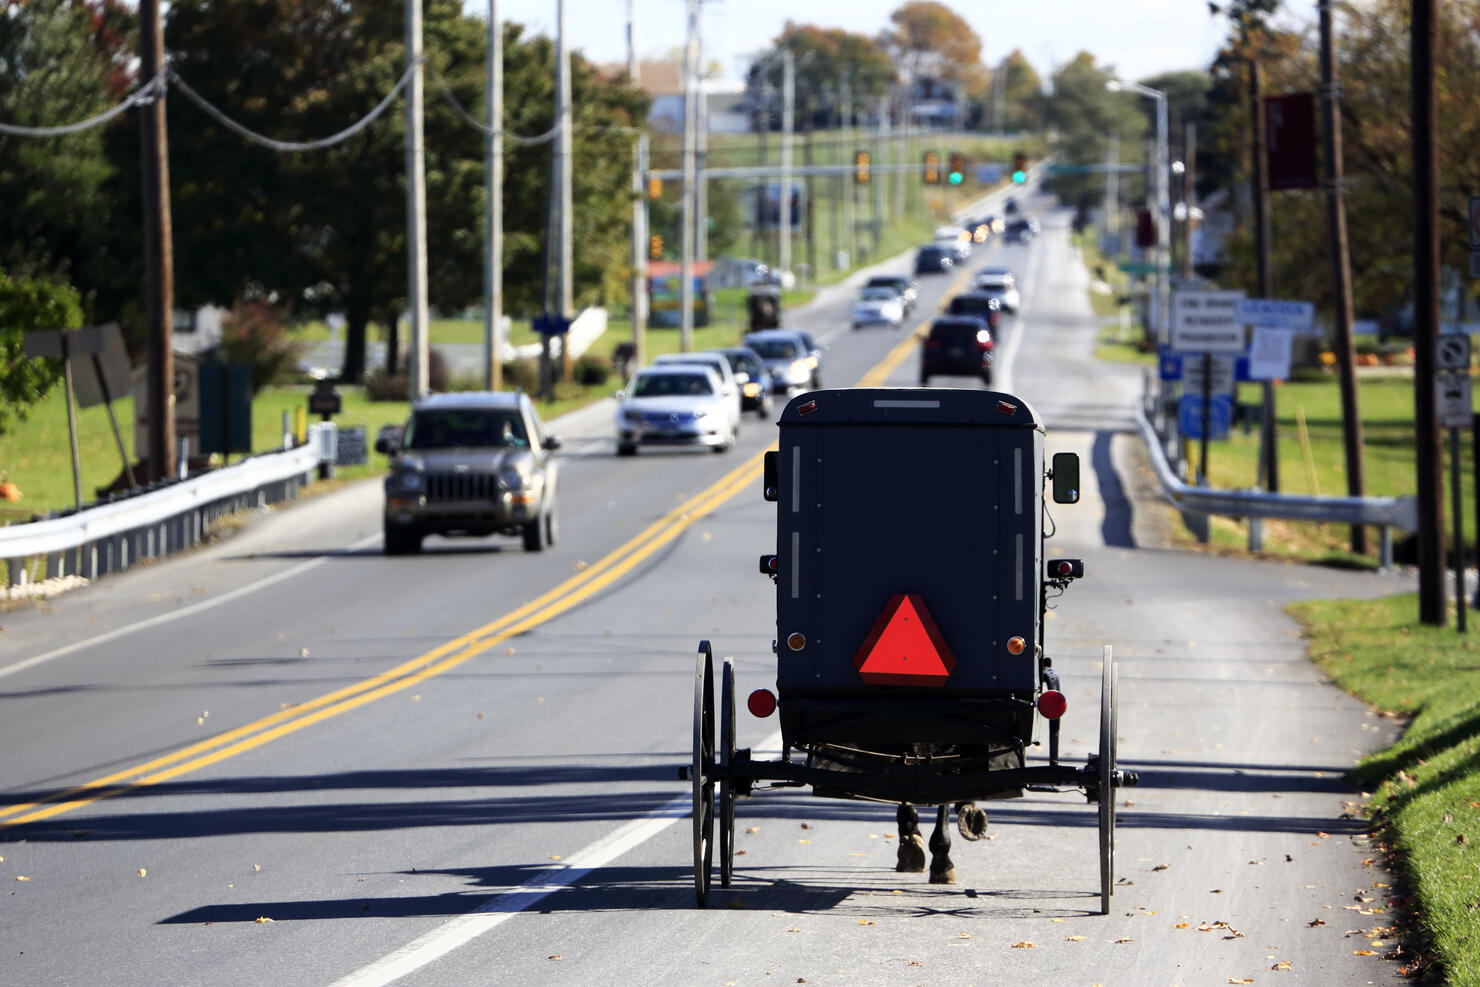 Amish buggy on local road